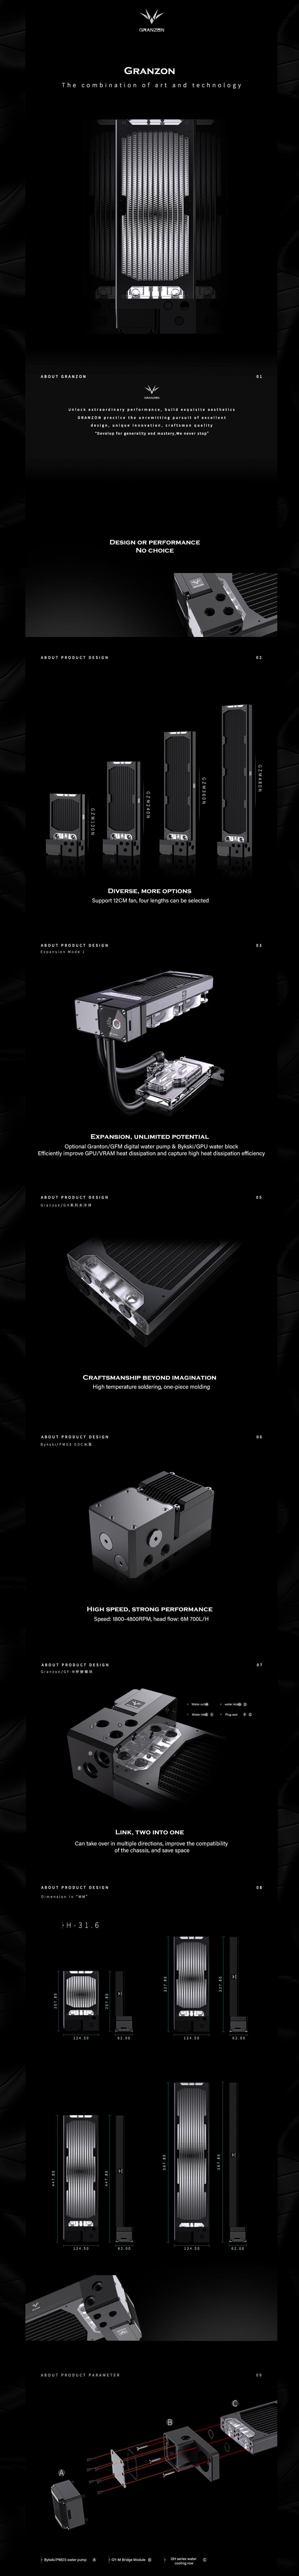 A large marketing image providing additional information about the product Bykski Granzon 120mm Pump Radiator Combo - Additional alt info not provided